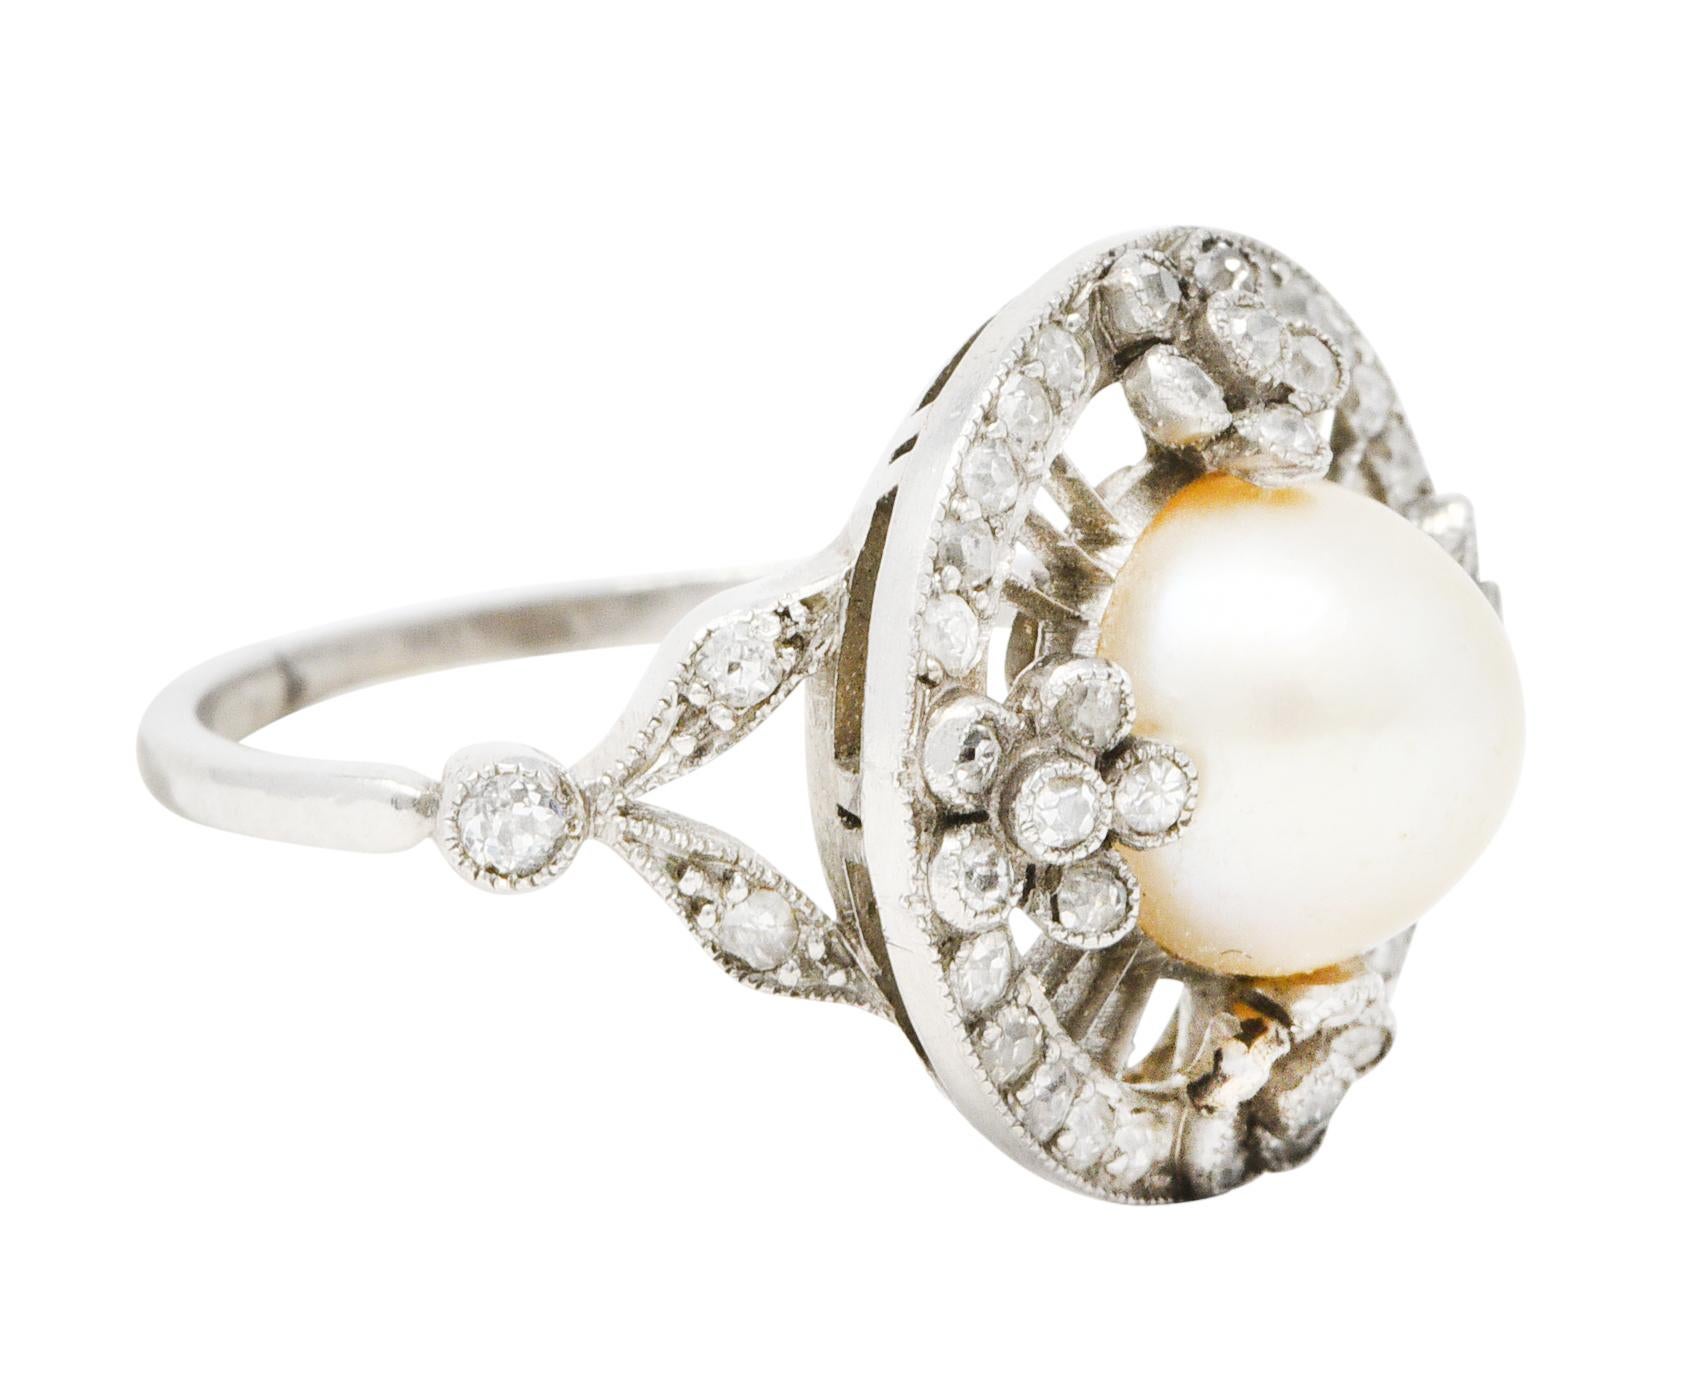 Circular cluster ring centers an 8.0 mm pearl - strong cream body color with strong iridescence

Surrounded by a striated design with four floral stations at each cardinal point

With a diamond halo and flanked by split shoulders in a stylized